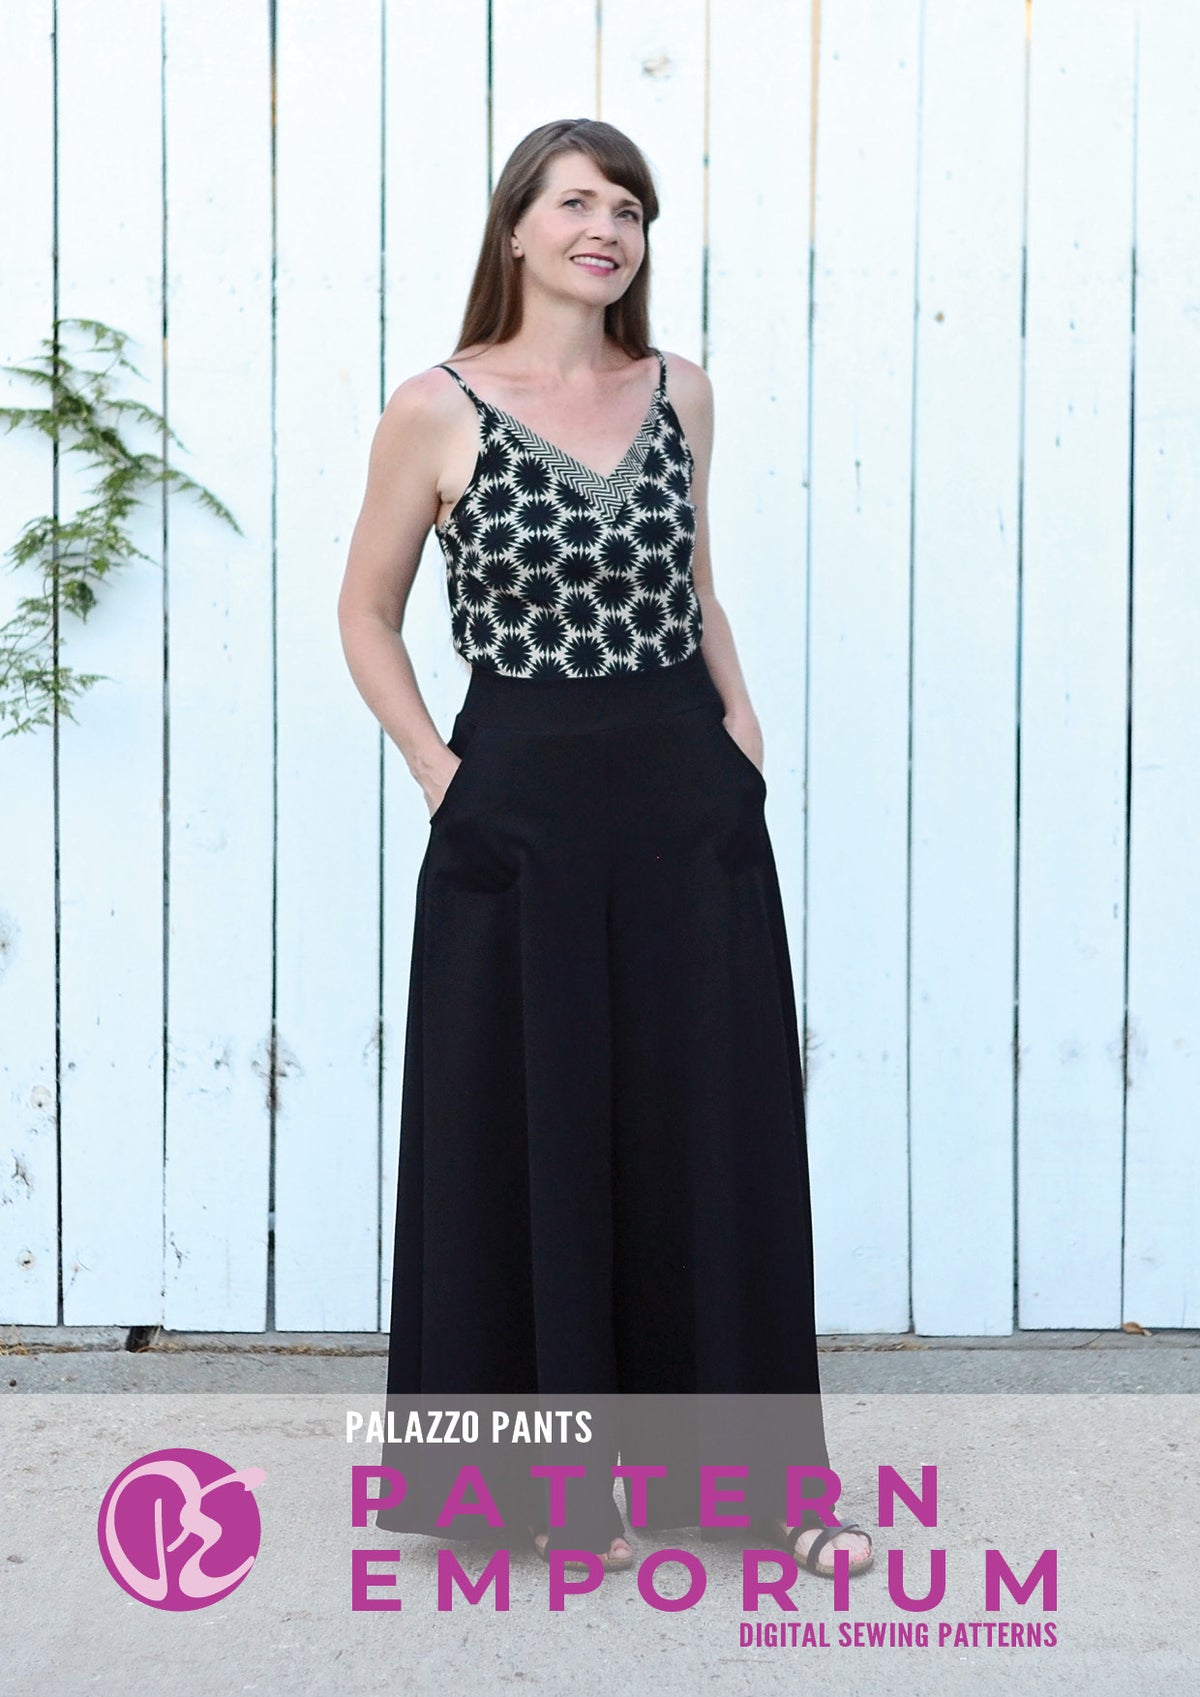 Palazzo pants pattern drafting in 5 minutes - YouTube